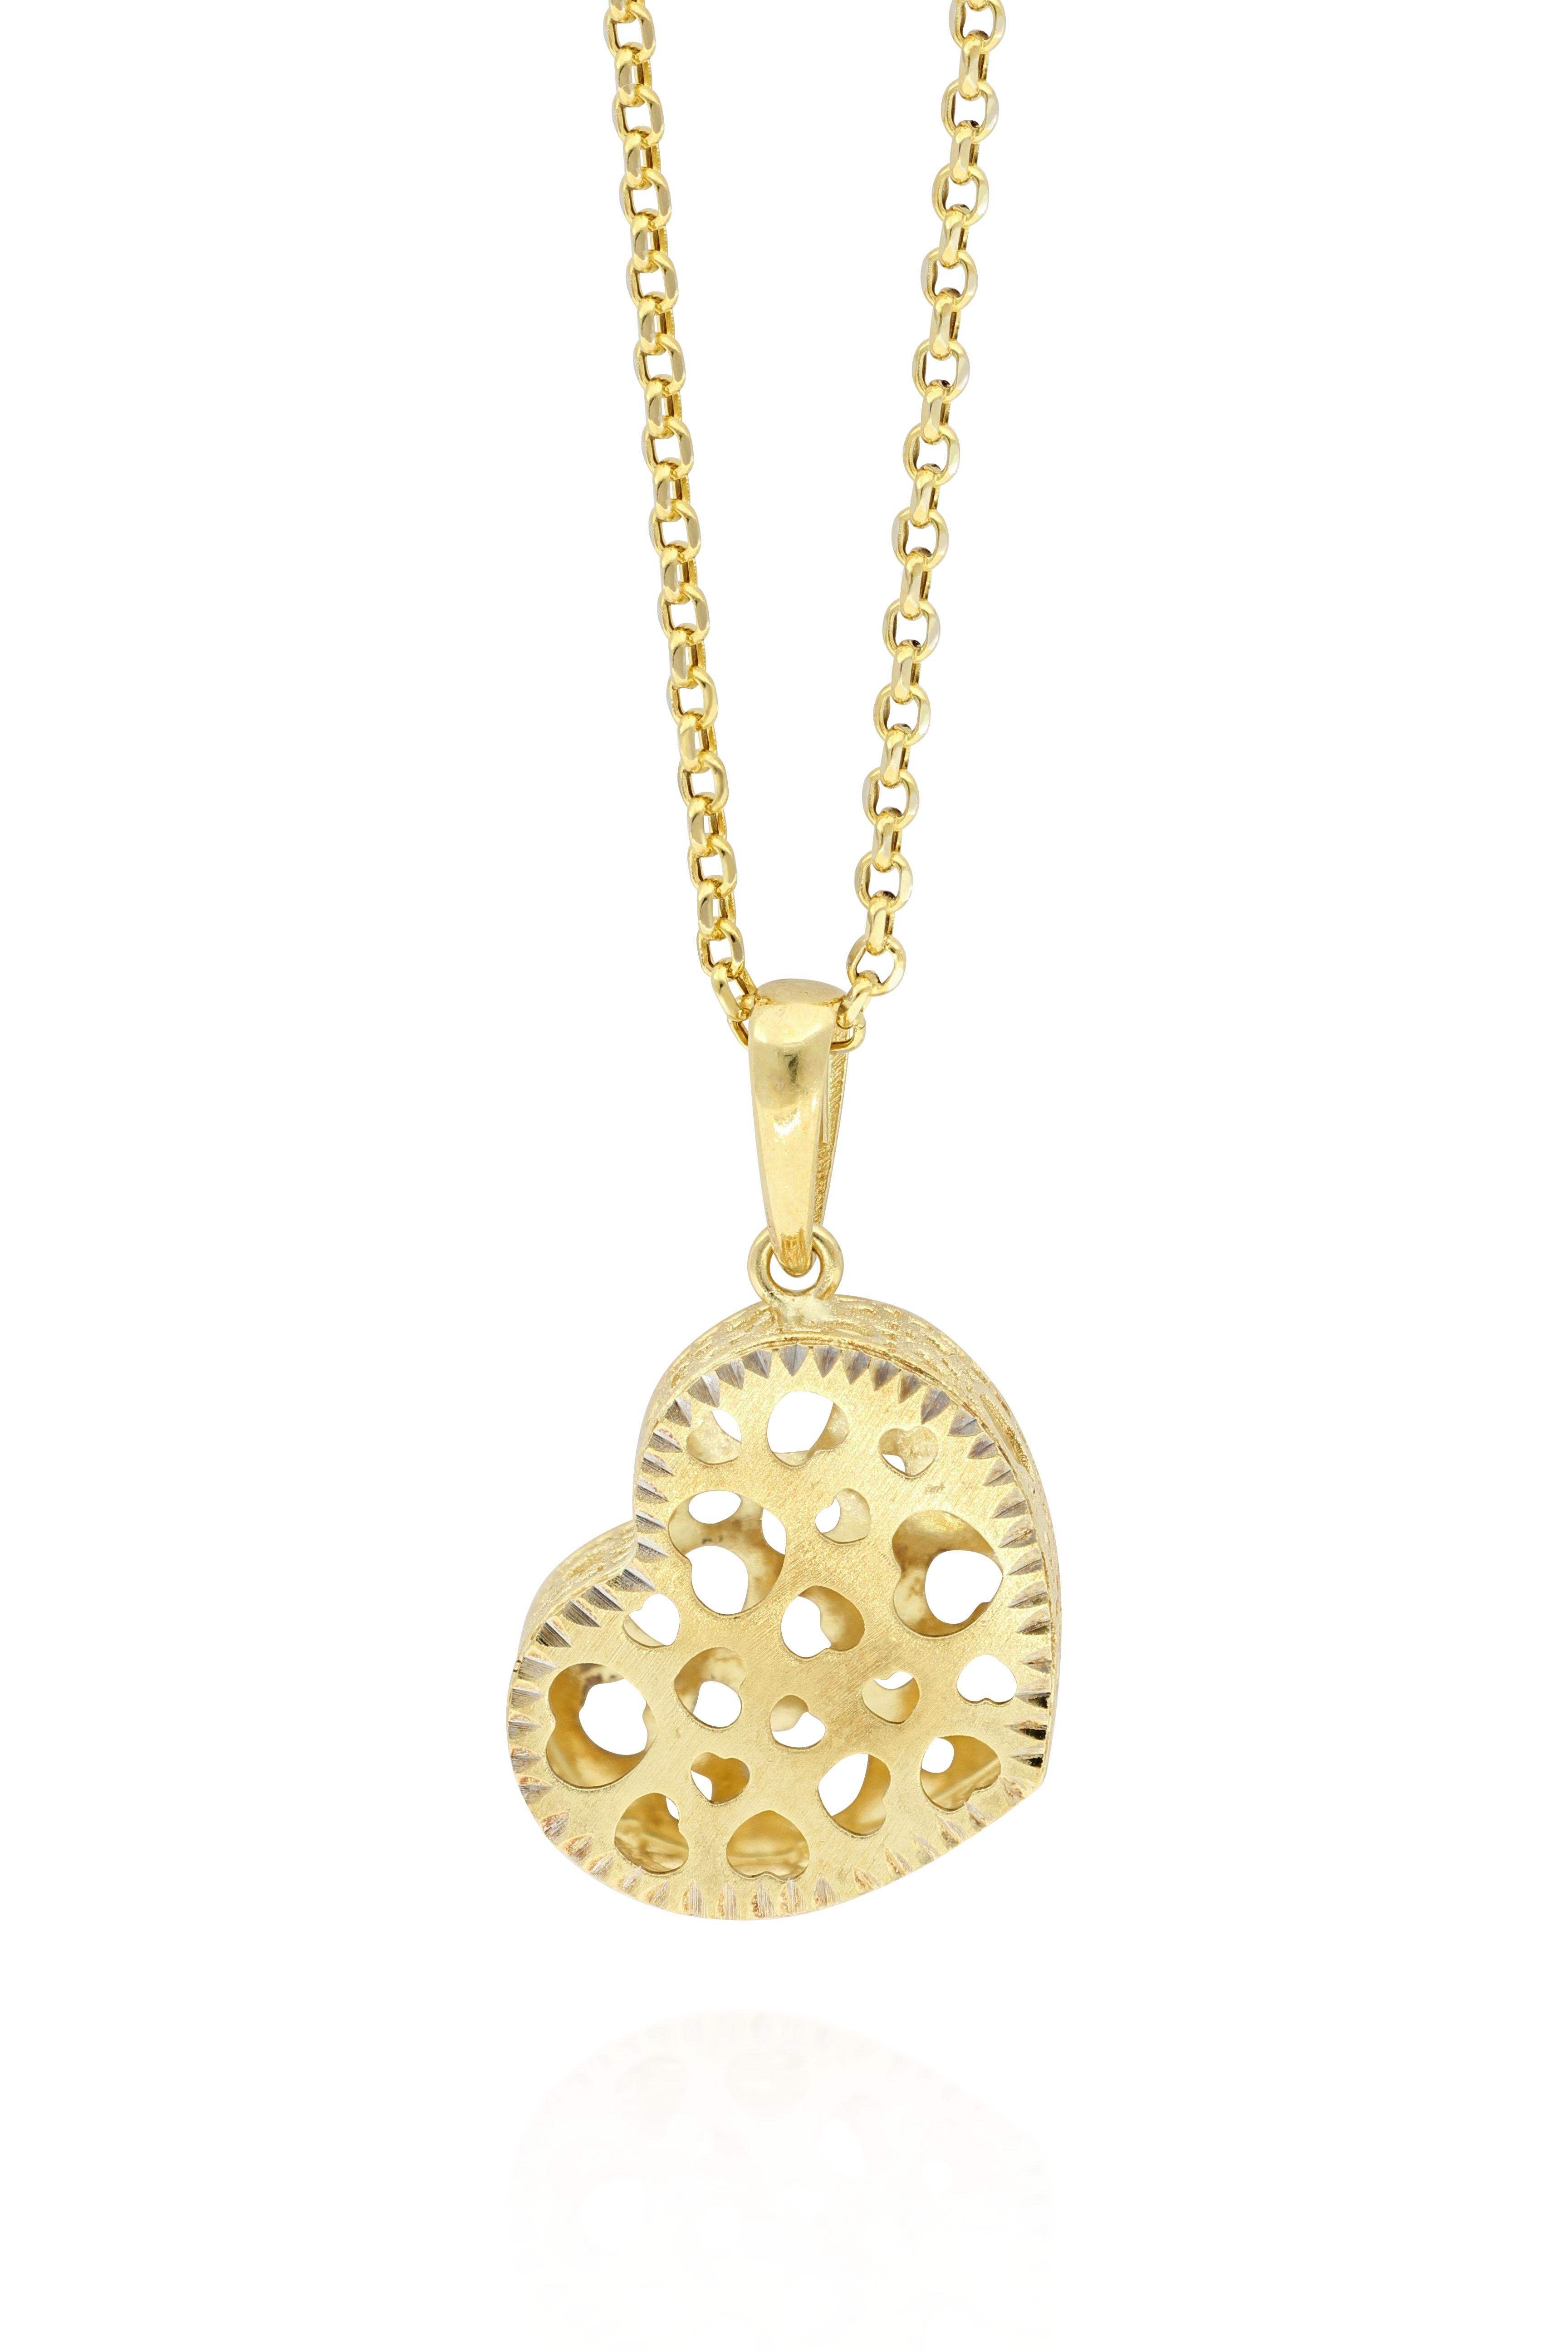 This stylish heart shape pendant necklace is made of 18K yellow gold, Italian designed, with heart shape patterns all over the pendant. The jewellery is beautiful and trendy, matching everyday causal wear.
The company was founded one and a half